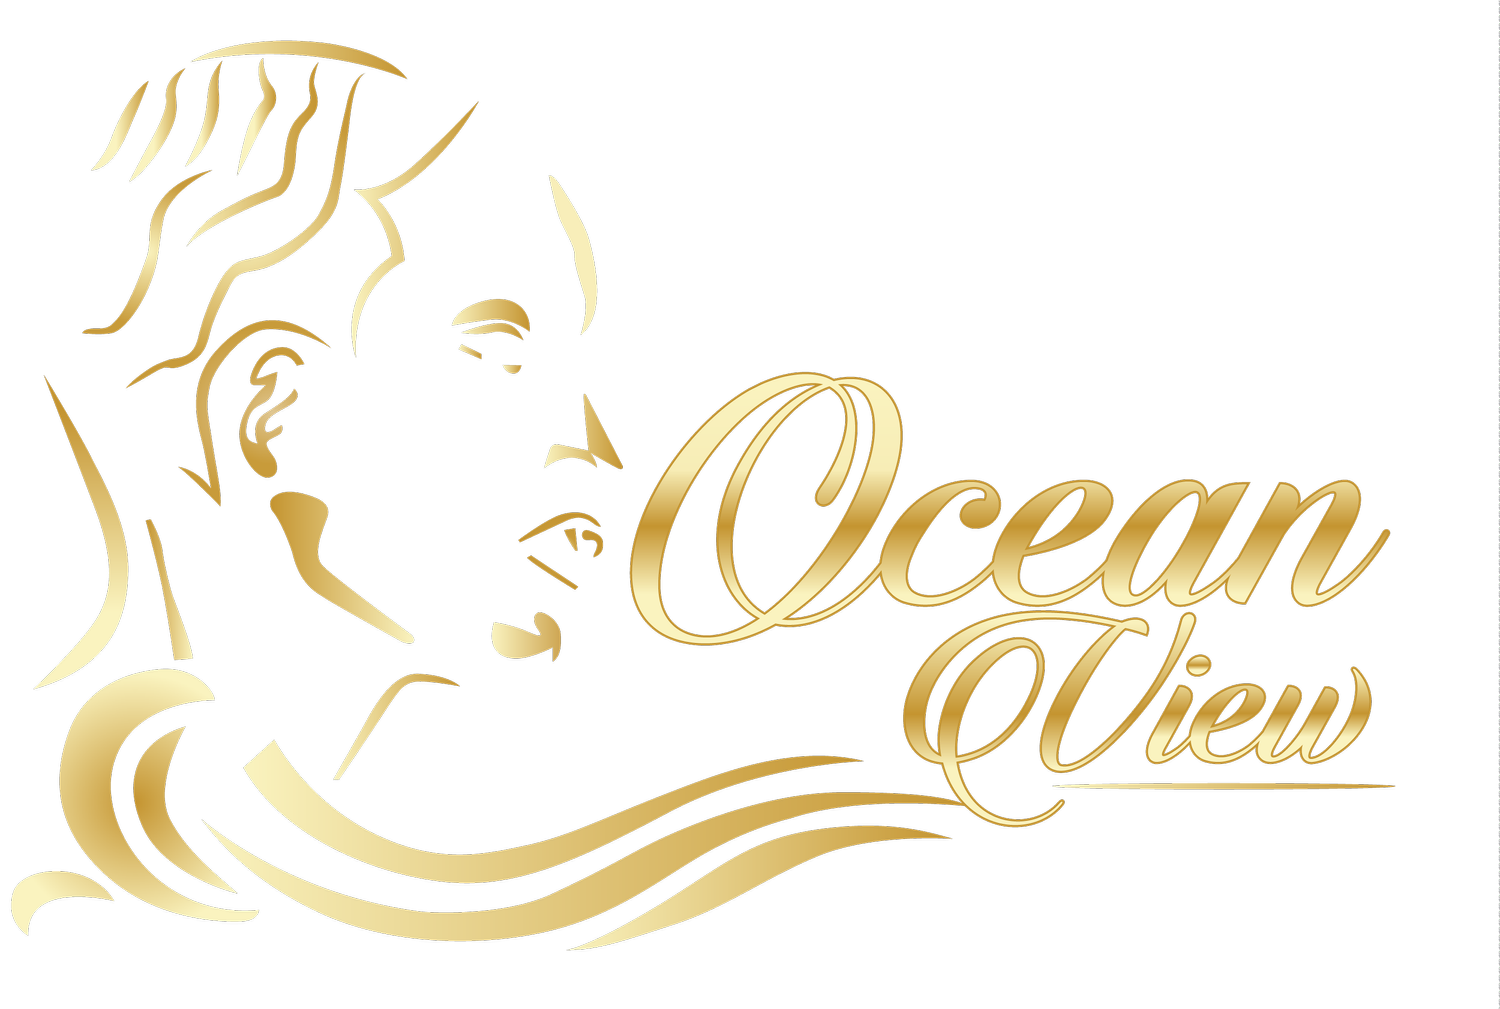 The Ocean View Brand